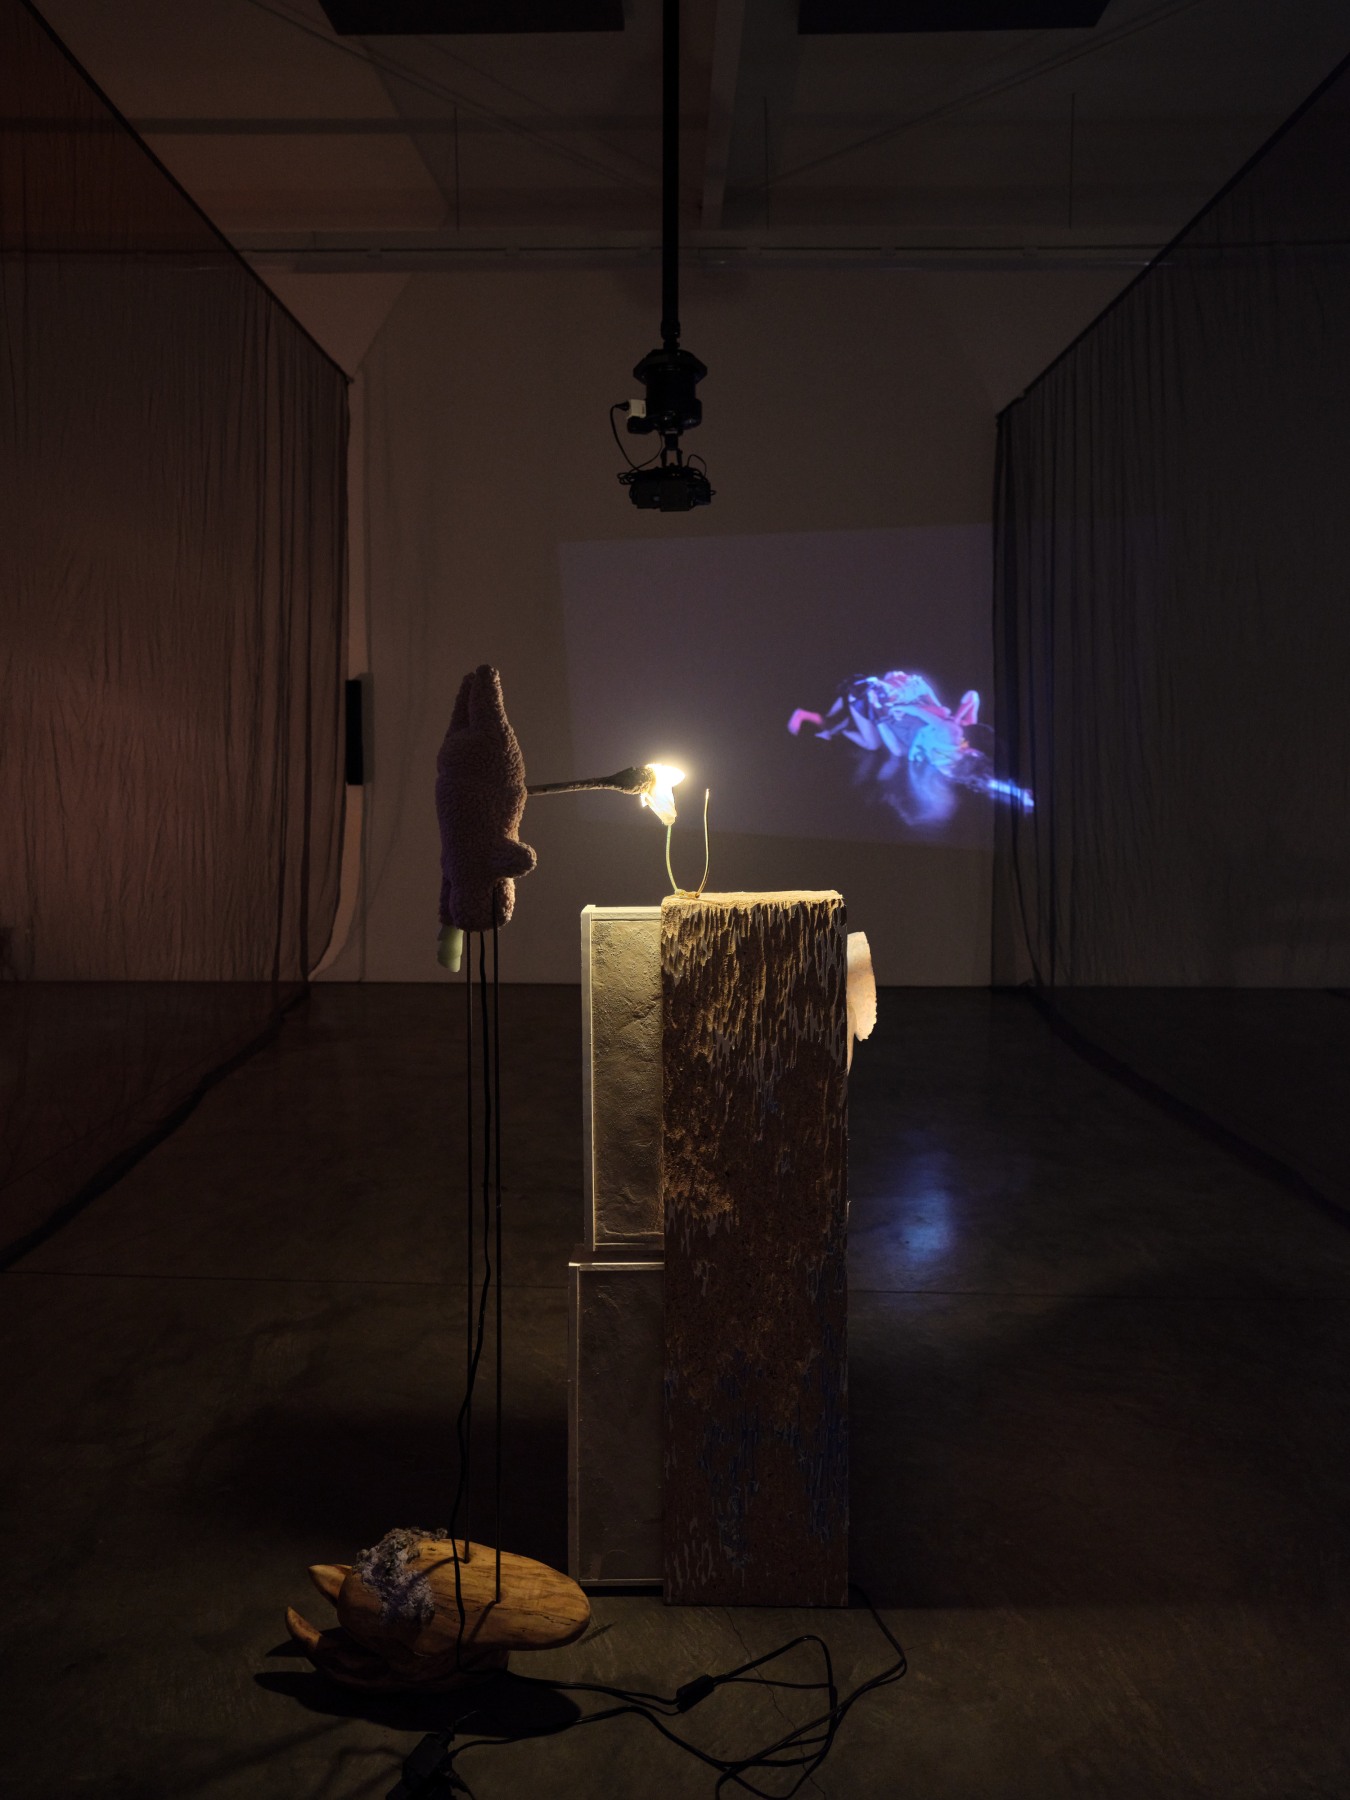 Catalina Ouyang, forgive everything, installation view, 2022